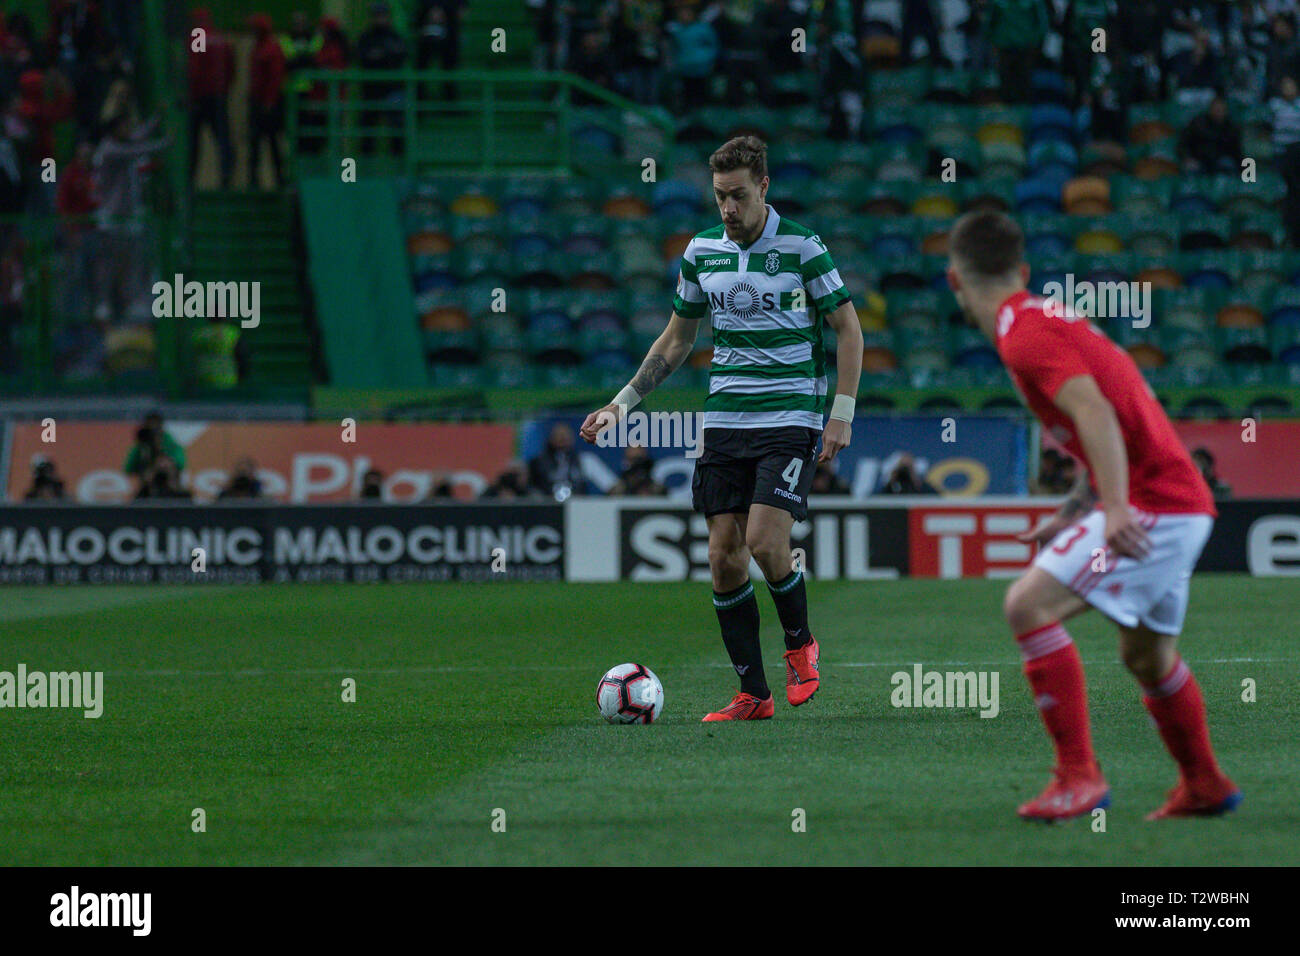 April 03, 2019. Lisbon, Portugal. Sporting's defender from Uruguay Sebastian Coates (4) in action during the game Sporting CP vs SL Benfica © Alexandre de Sousa/Alamy Live News Stock Photo